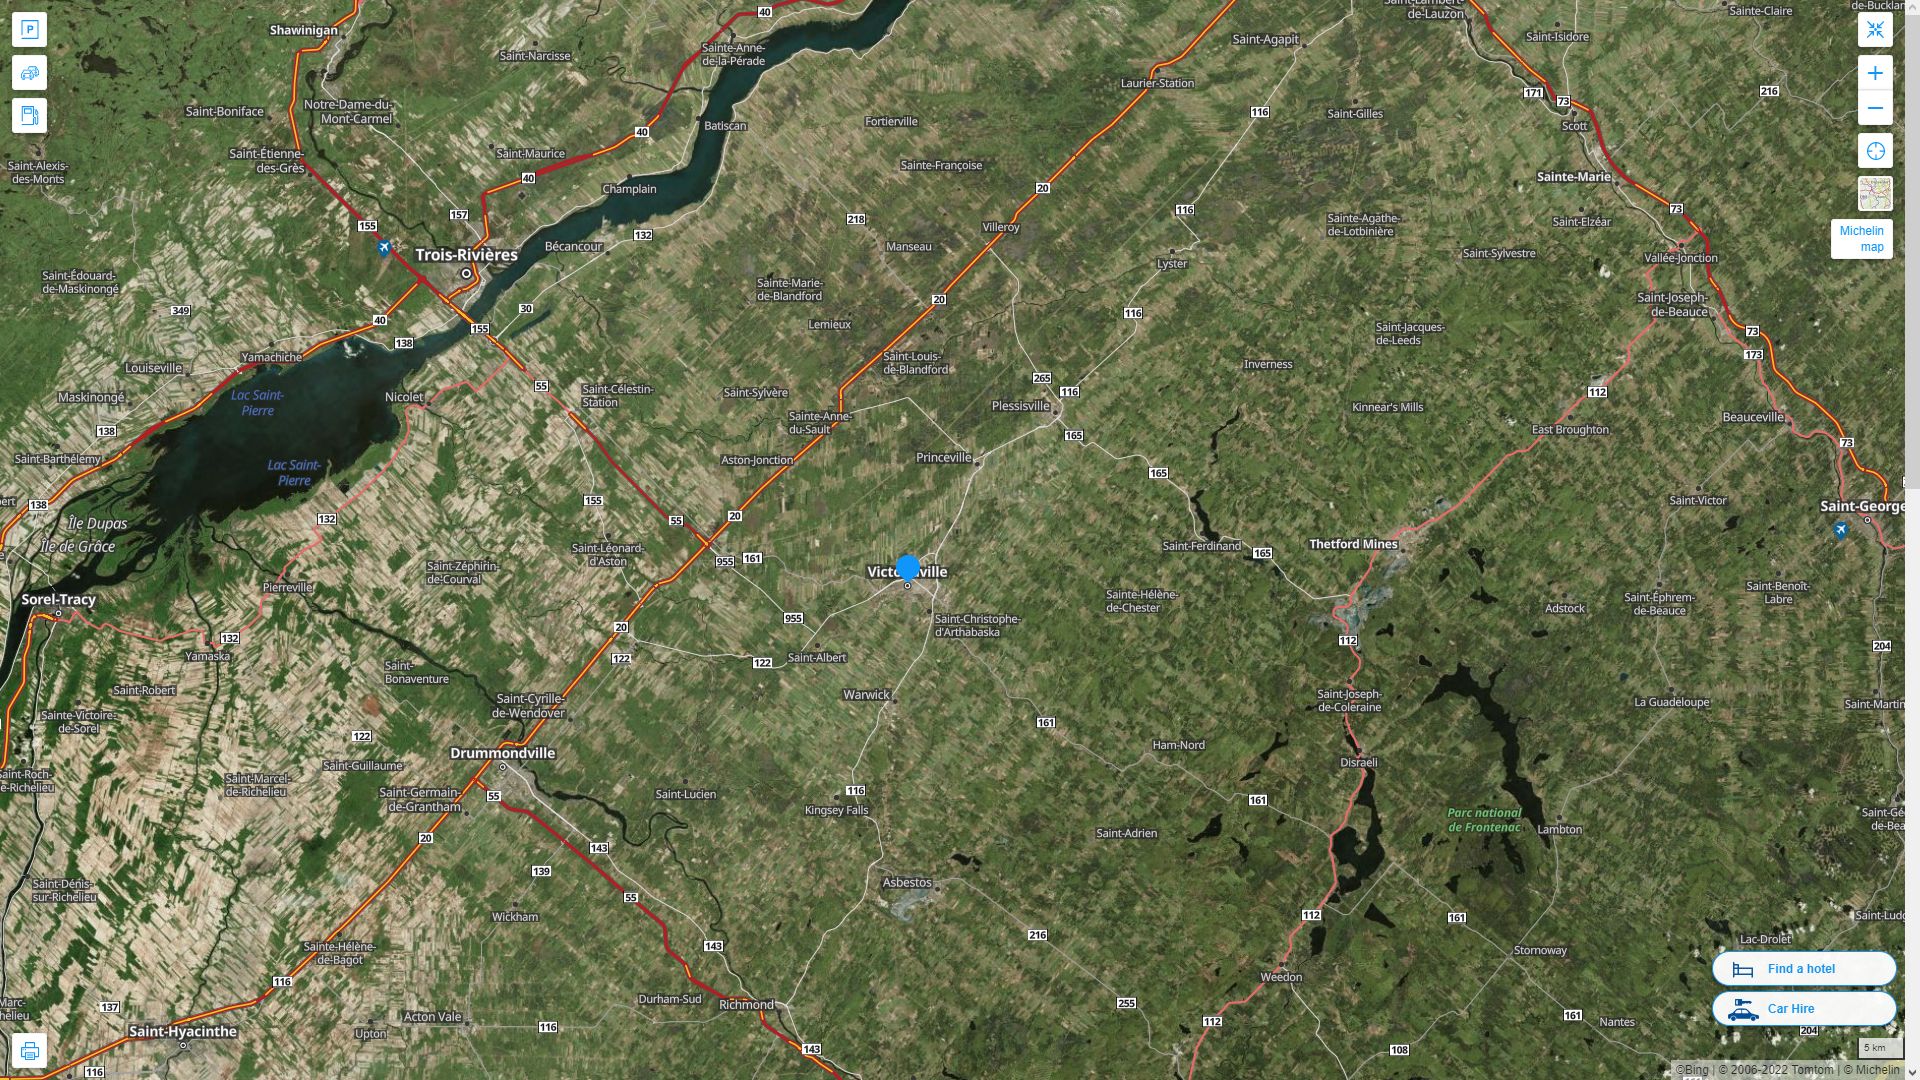 Victoriaville Highway and Road Map with Satellite View